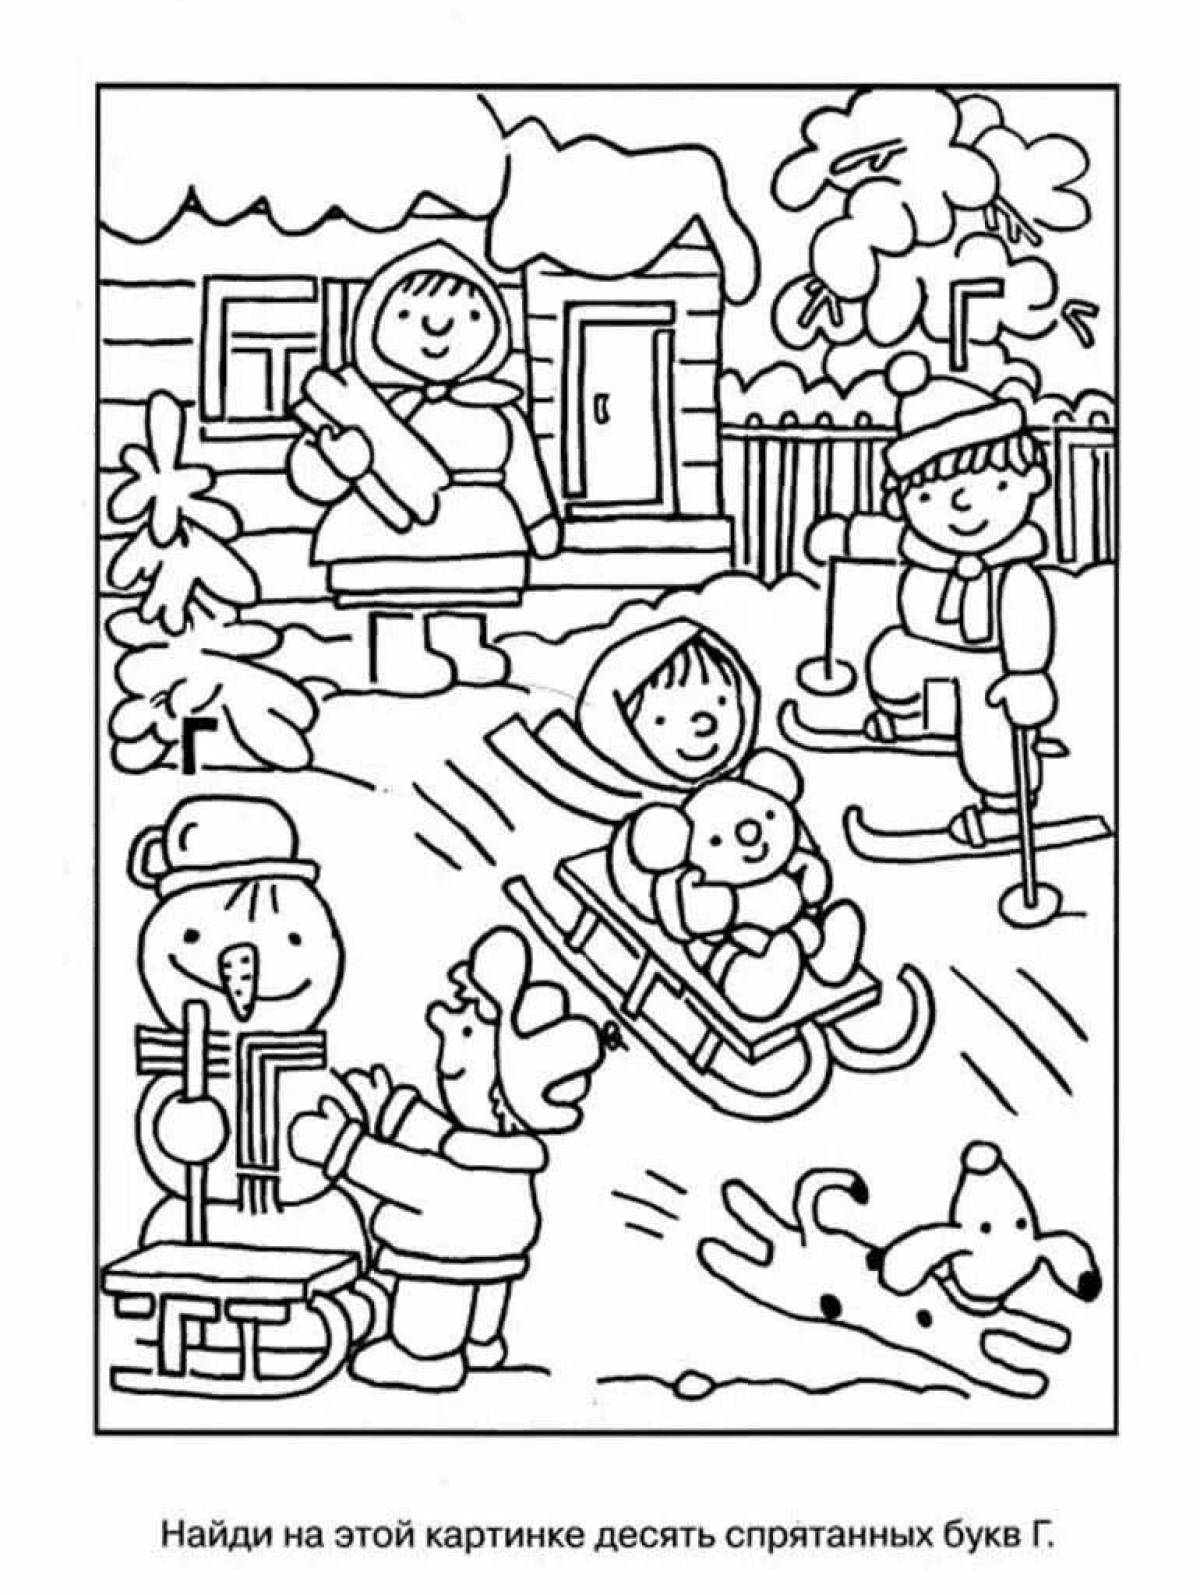 Incredible coloring book where to find